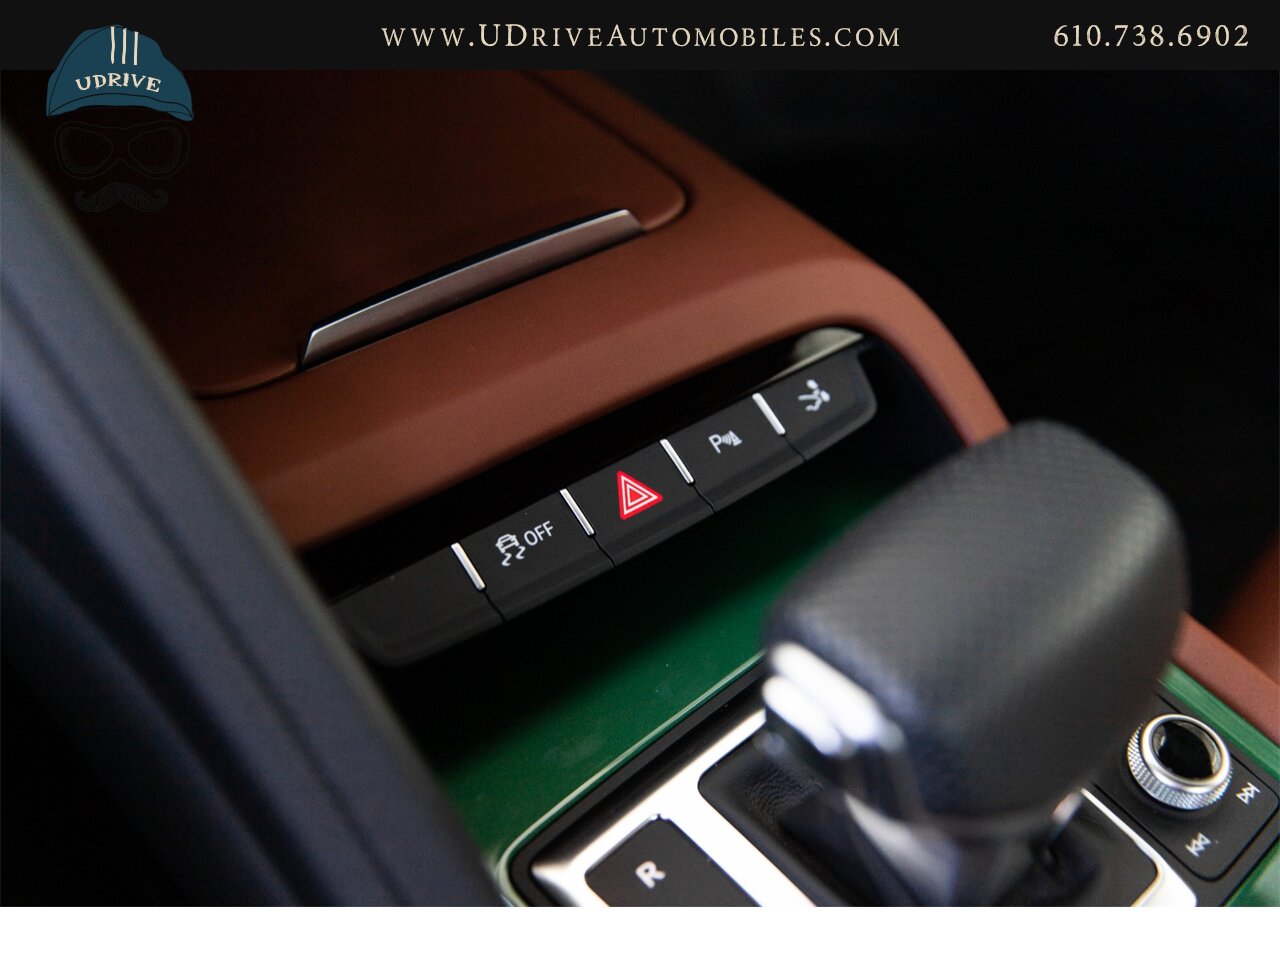 2017 Audi R8 Audi Exclusive Avocado Green Vermont Brown Leather  Diamond Stitching V10 Carbon Fiber - Photo 43 - West Chester, PA 19382